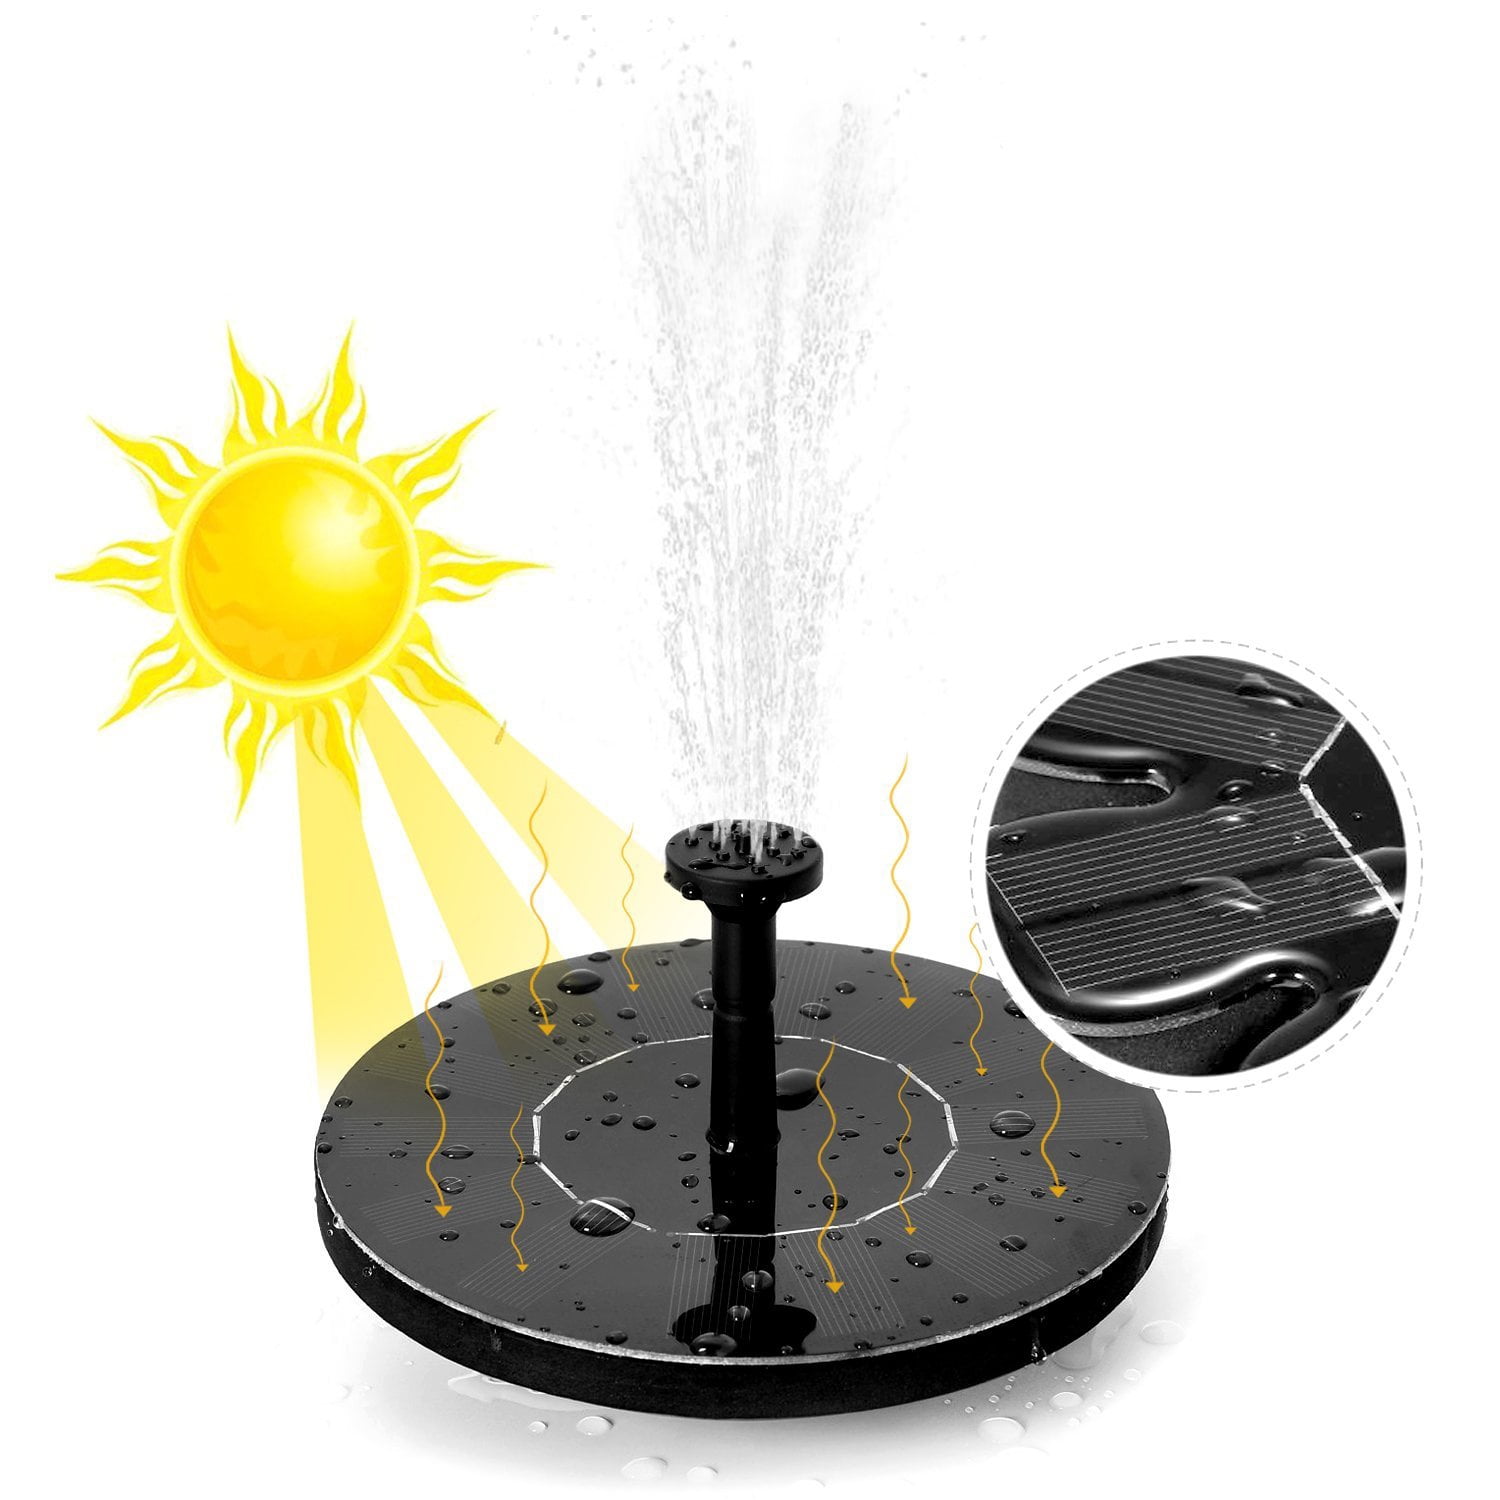 MADETEC Upgraded 3W Solar Fountain Pump with Battery Backup LED Lights New Spray Heads,Submersible Water Pump for Bird Bath Outdoors Fish Tank Small Pond Pool Garden and Lawn 